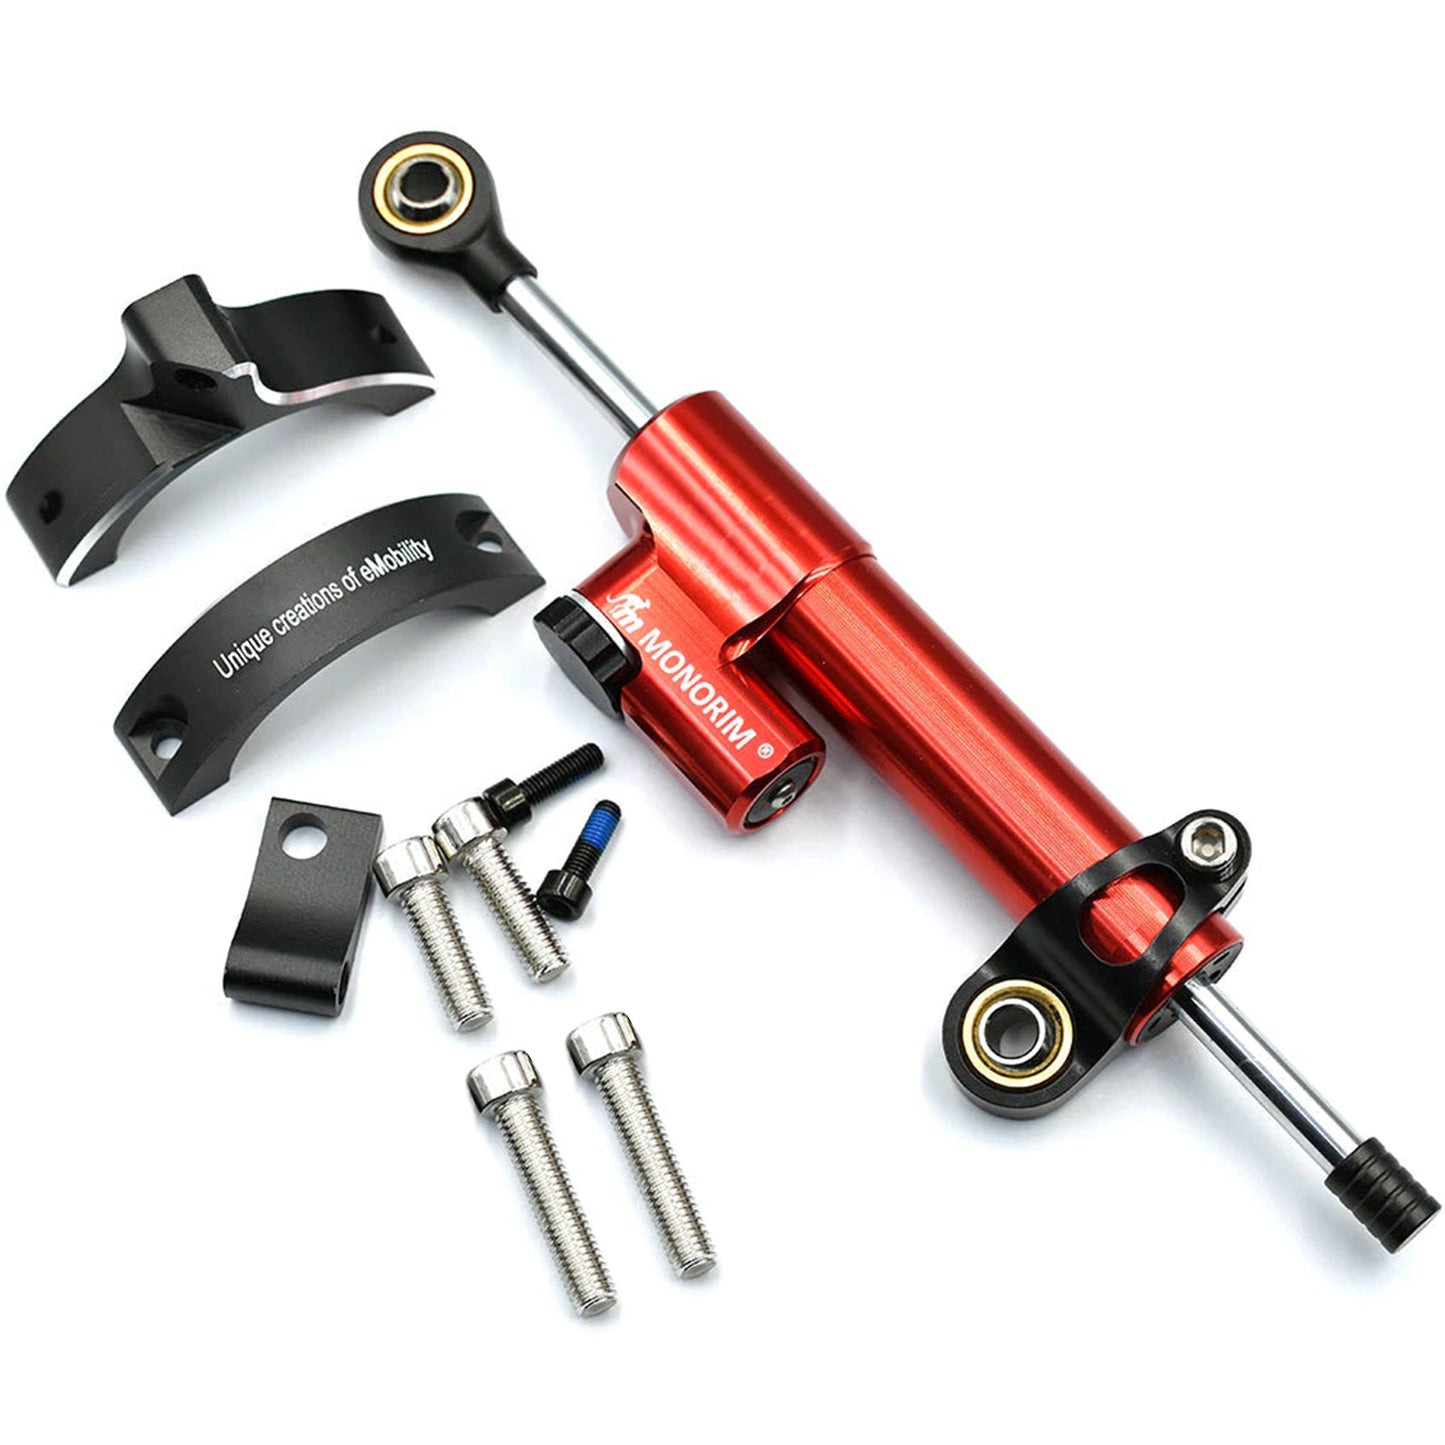 Monorim Steering Damping, Damper for T0s / T0s-R/  T2s pro / T2S pro+  Scooter , High-speed Stabilizer